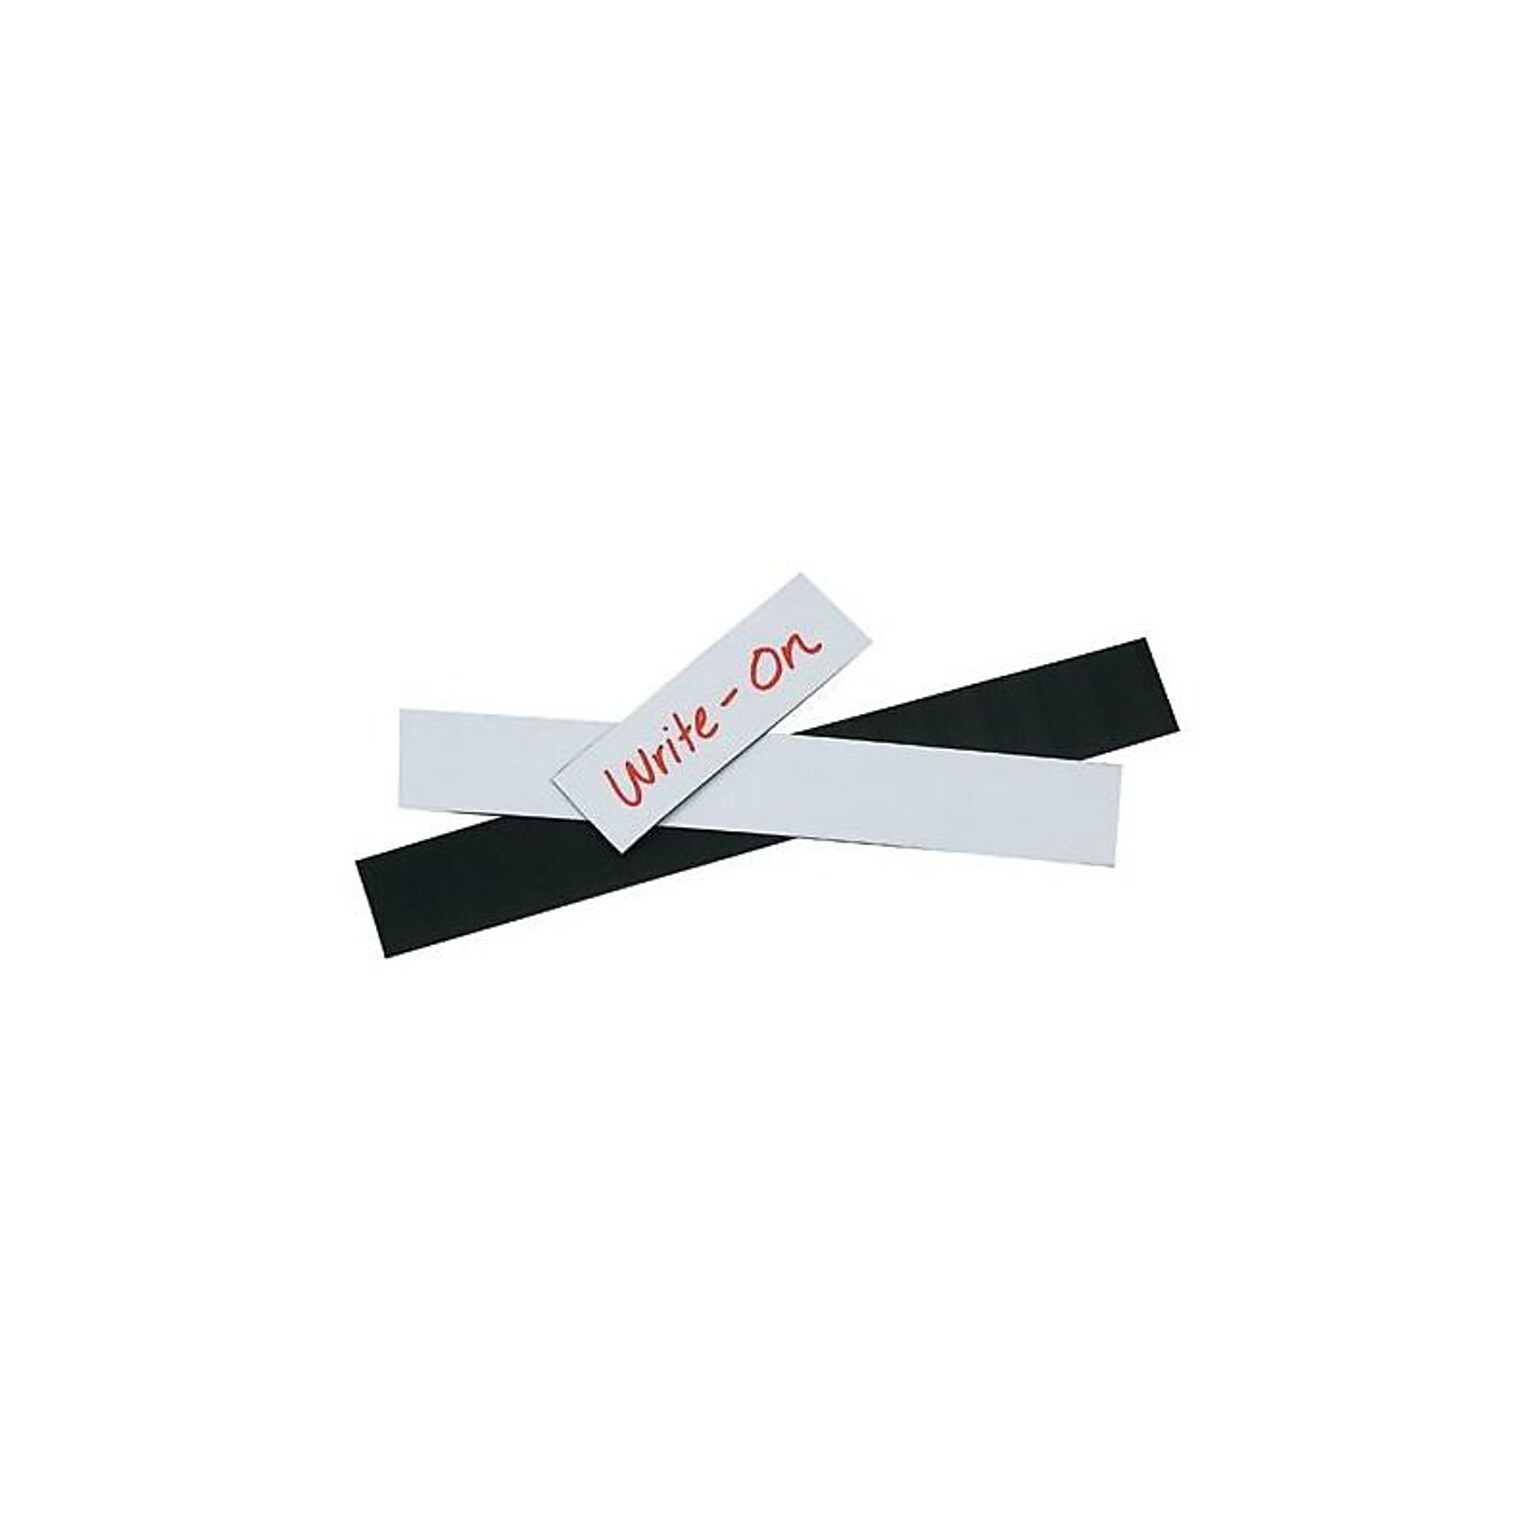 Warehouse Label Magnetic Strips, 2 x 6, White, 25/Pack (LH178)